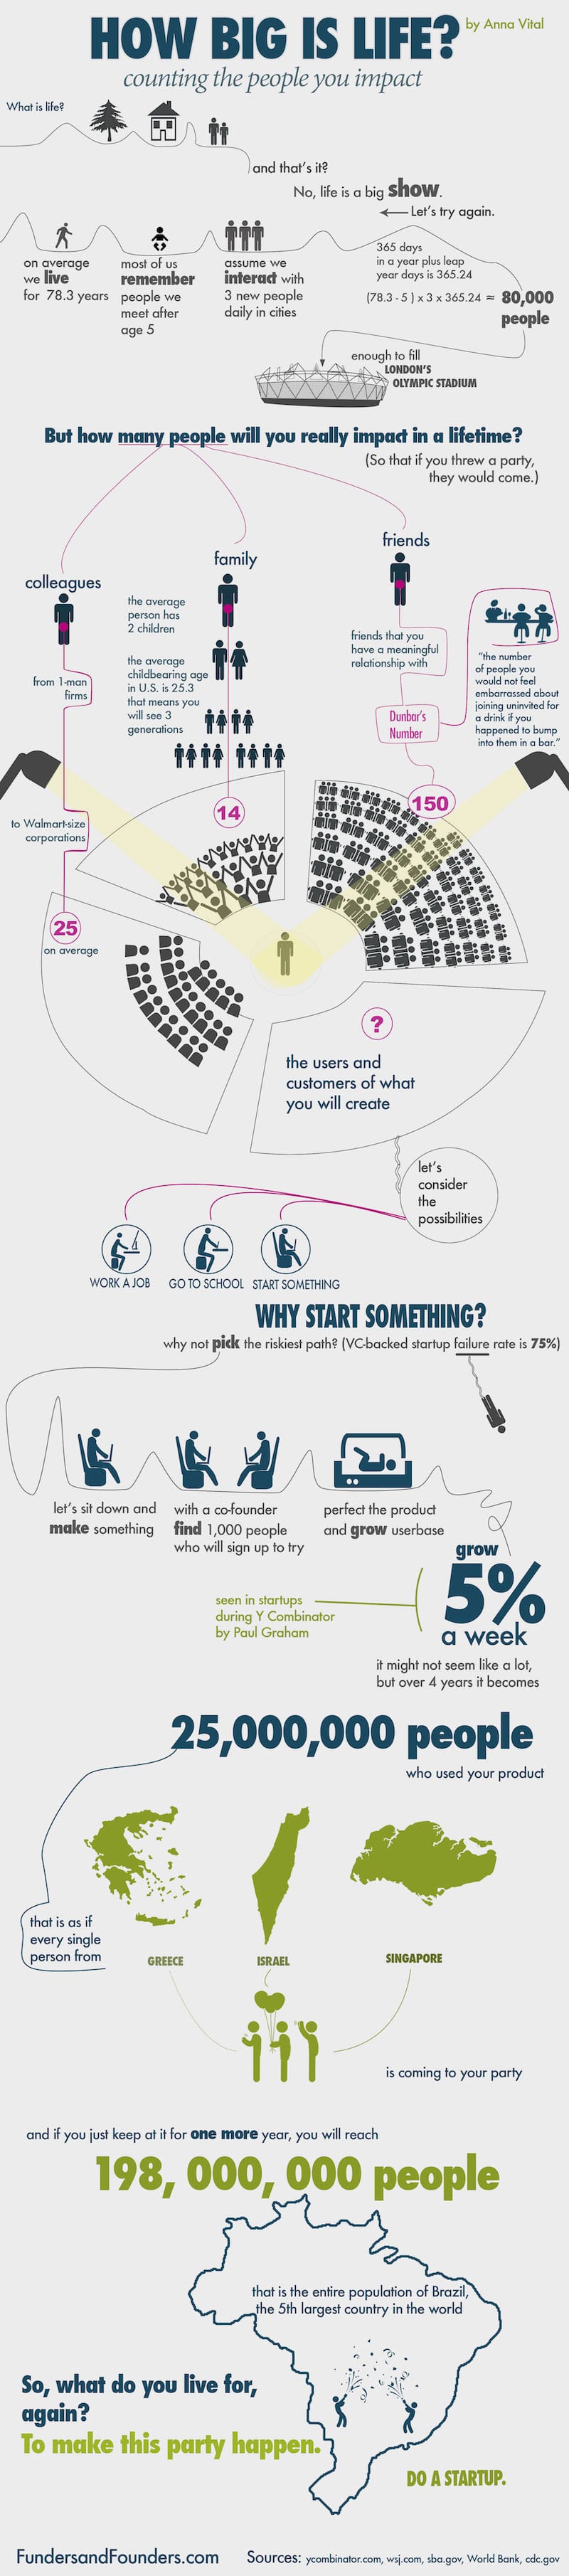 How Many People You Can Impact With Your Business Idea? [Infographic]